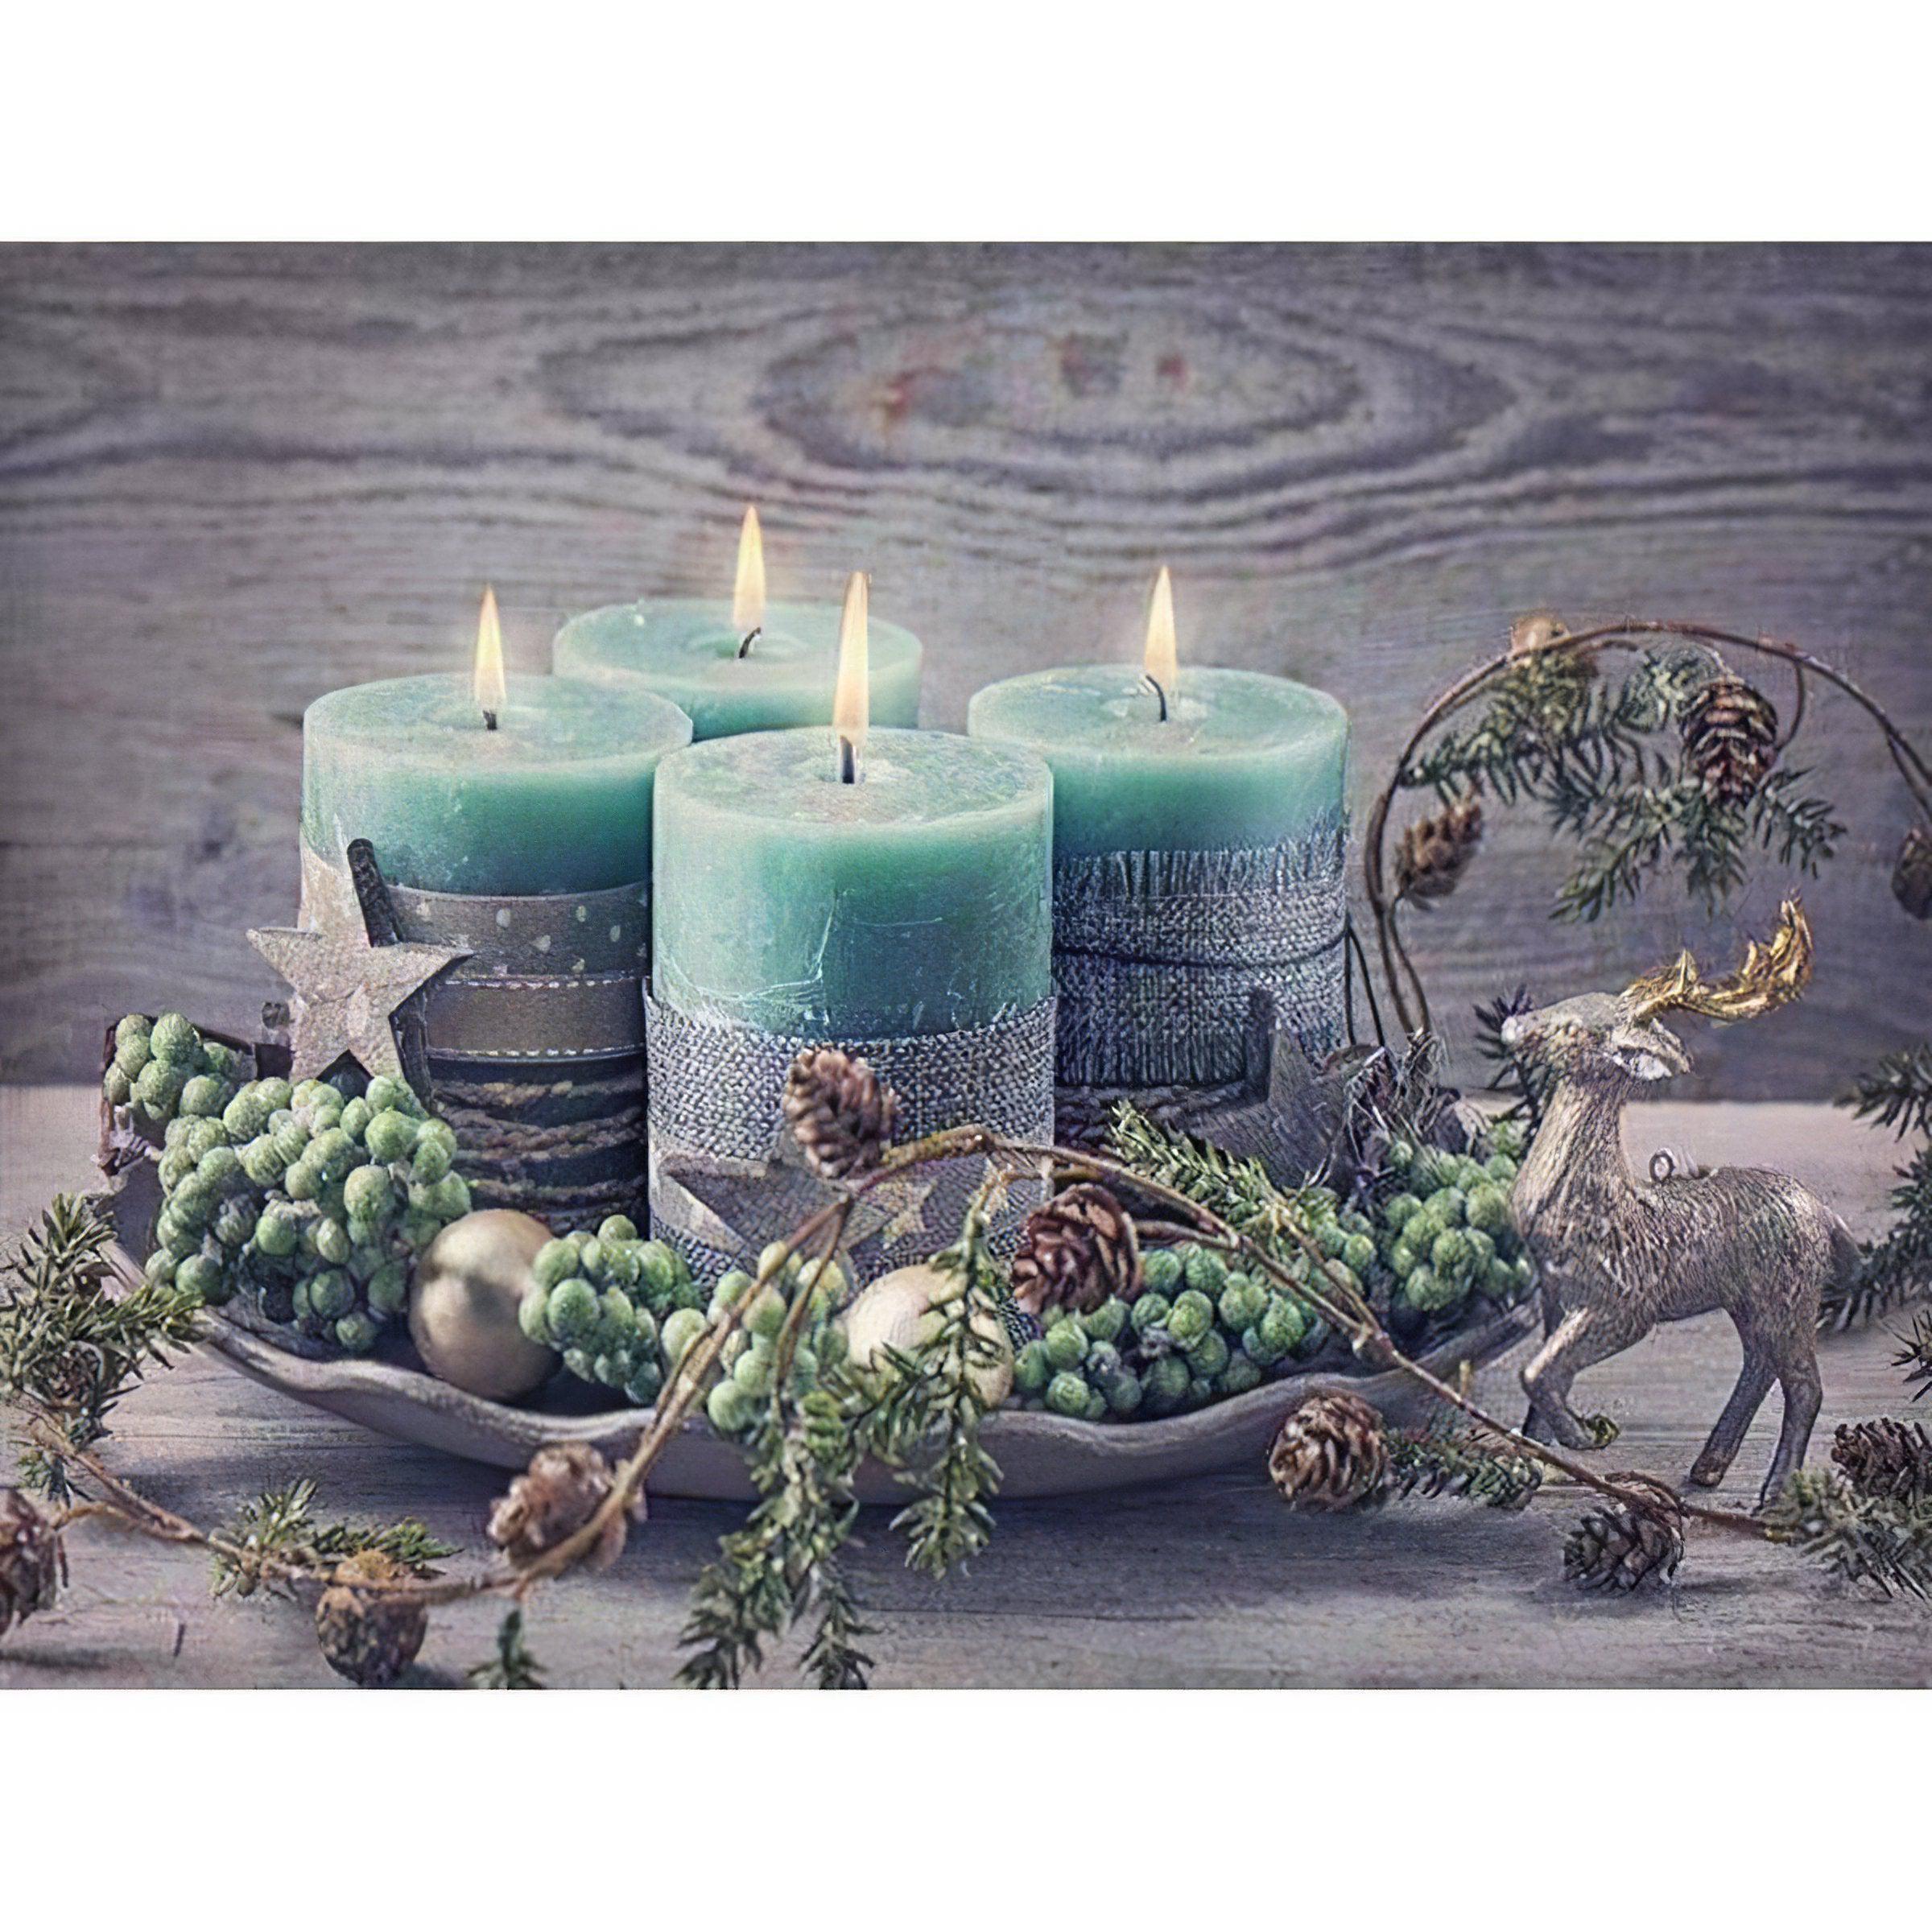 Four Beautiful Candles Of Christmas